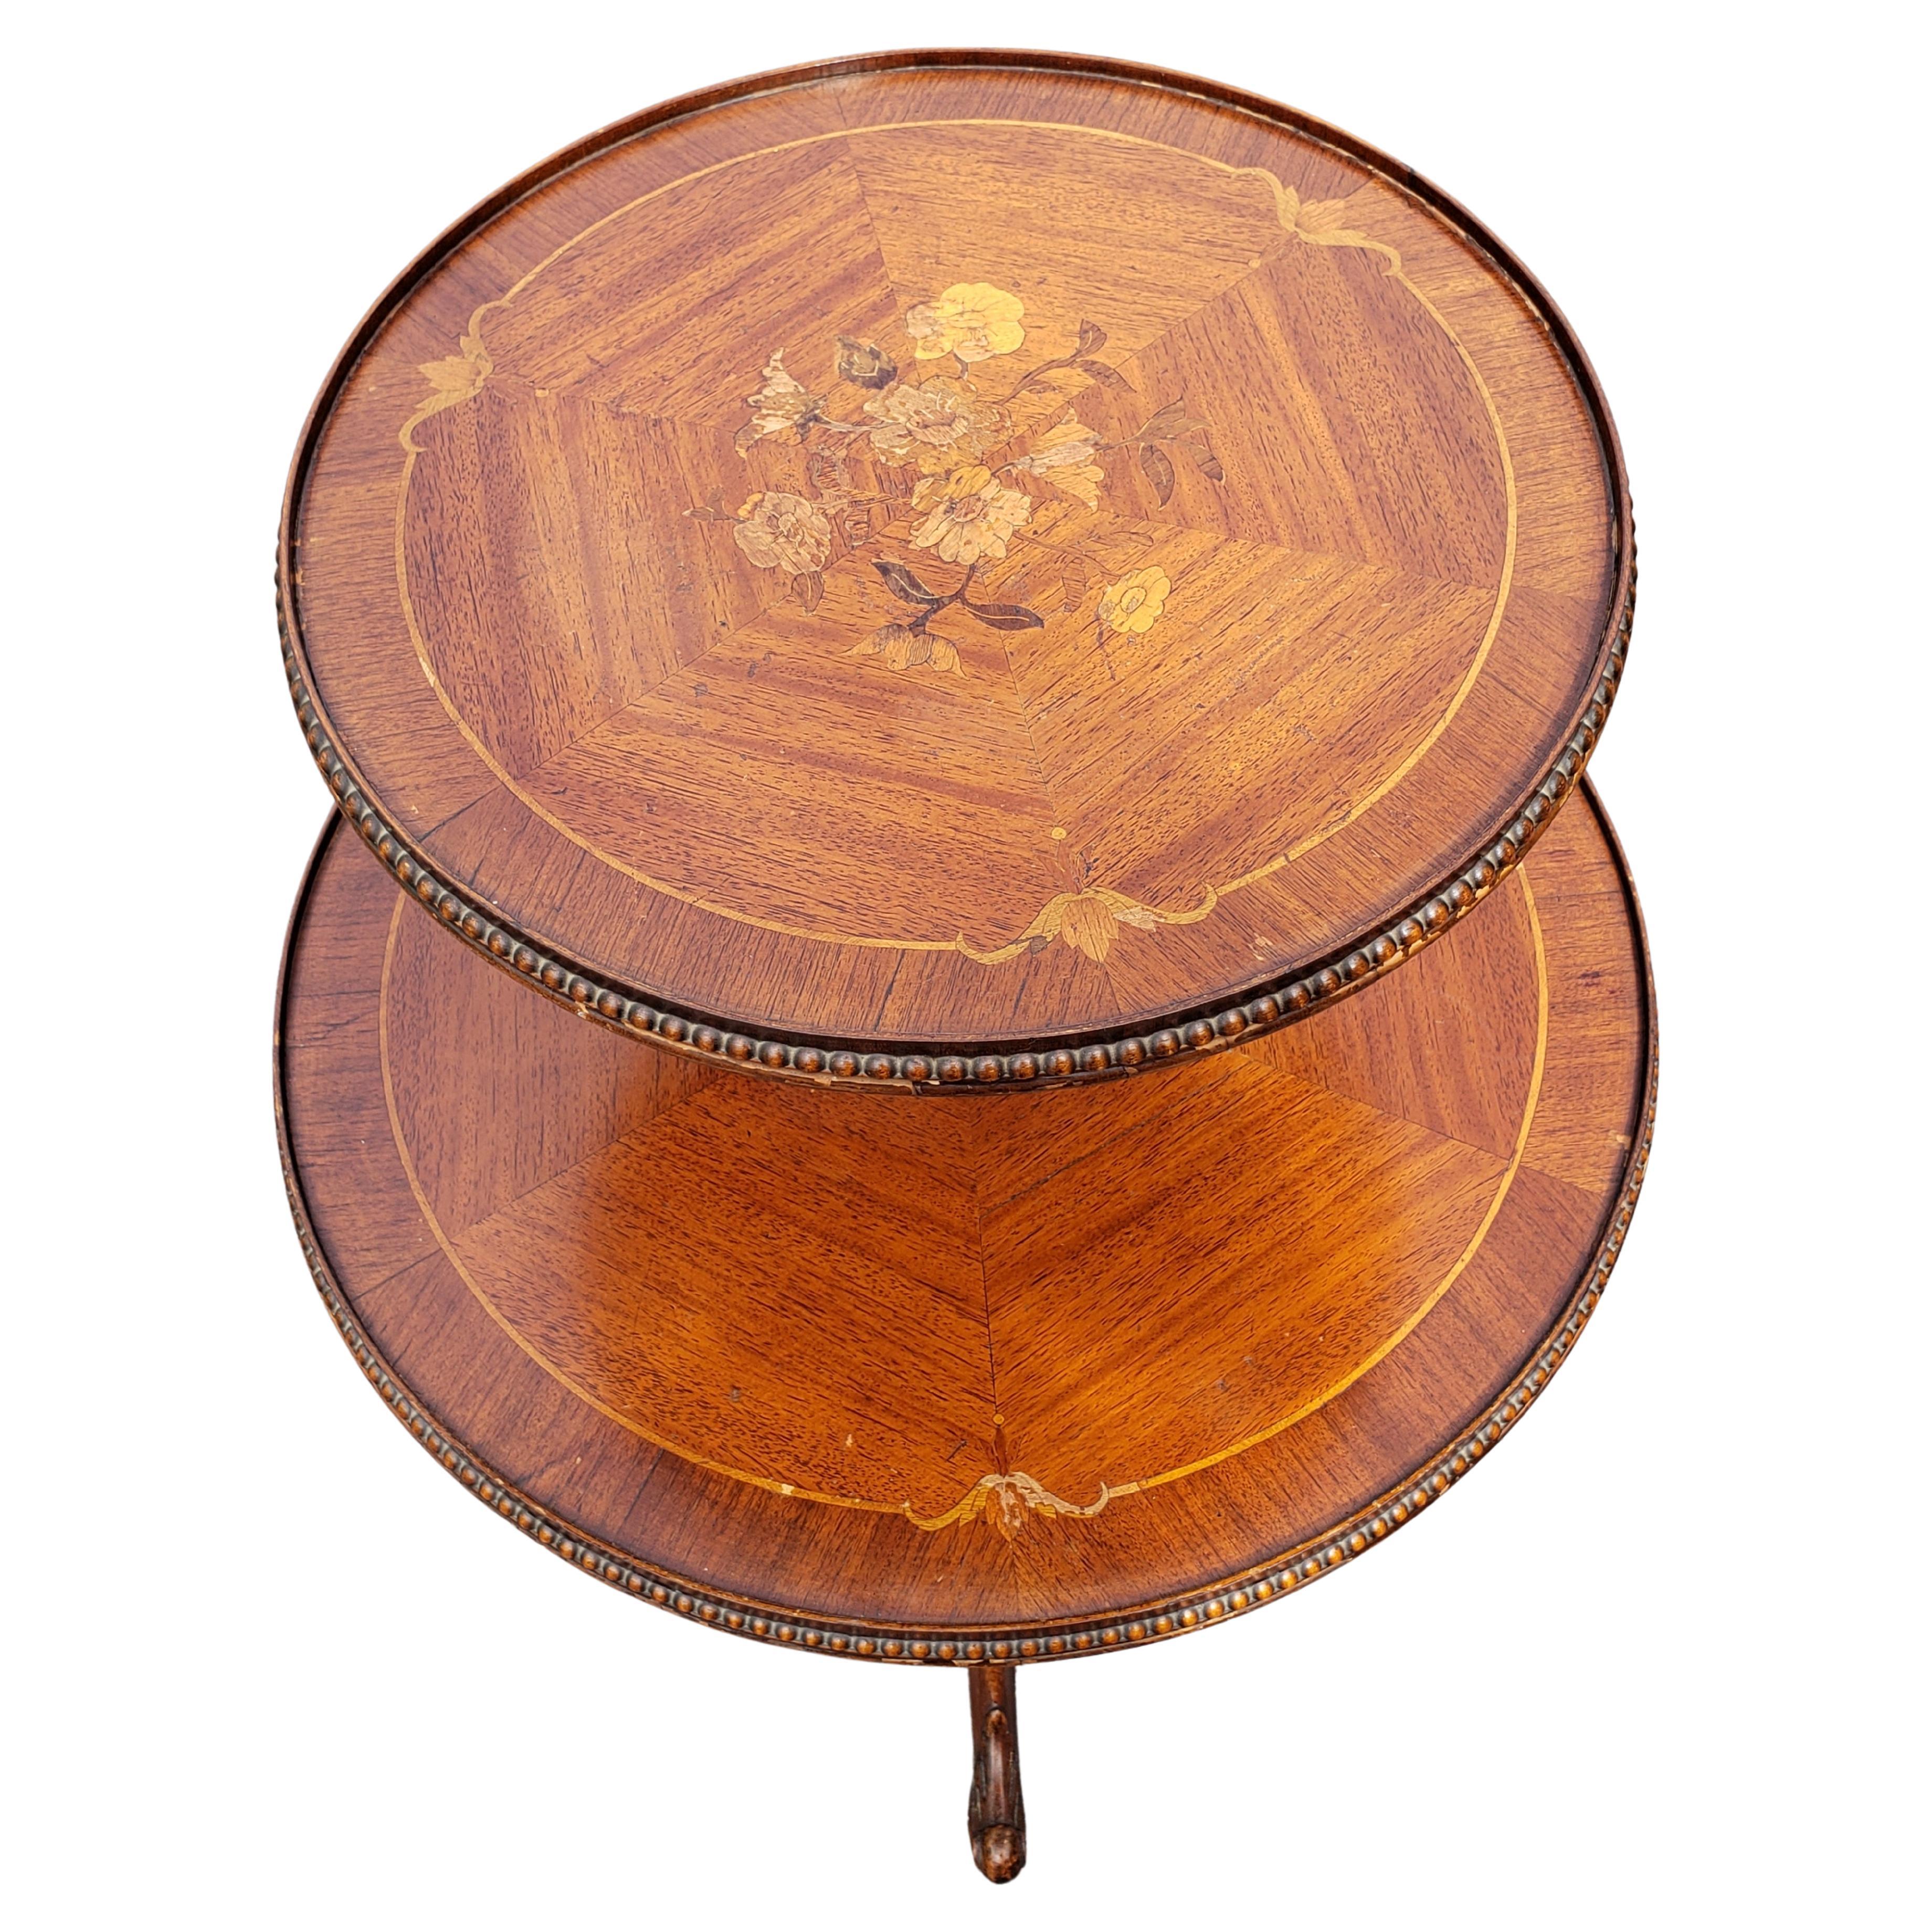 Exquisite George III style two-tier mahogany and walnut dumpwaiter with fine satinwood and kingwood flower inlays, fine Italian style marquetry work with beaded edges. 
General good antique condition.


W6052622.